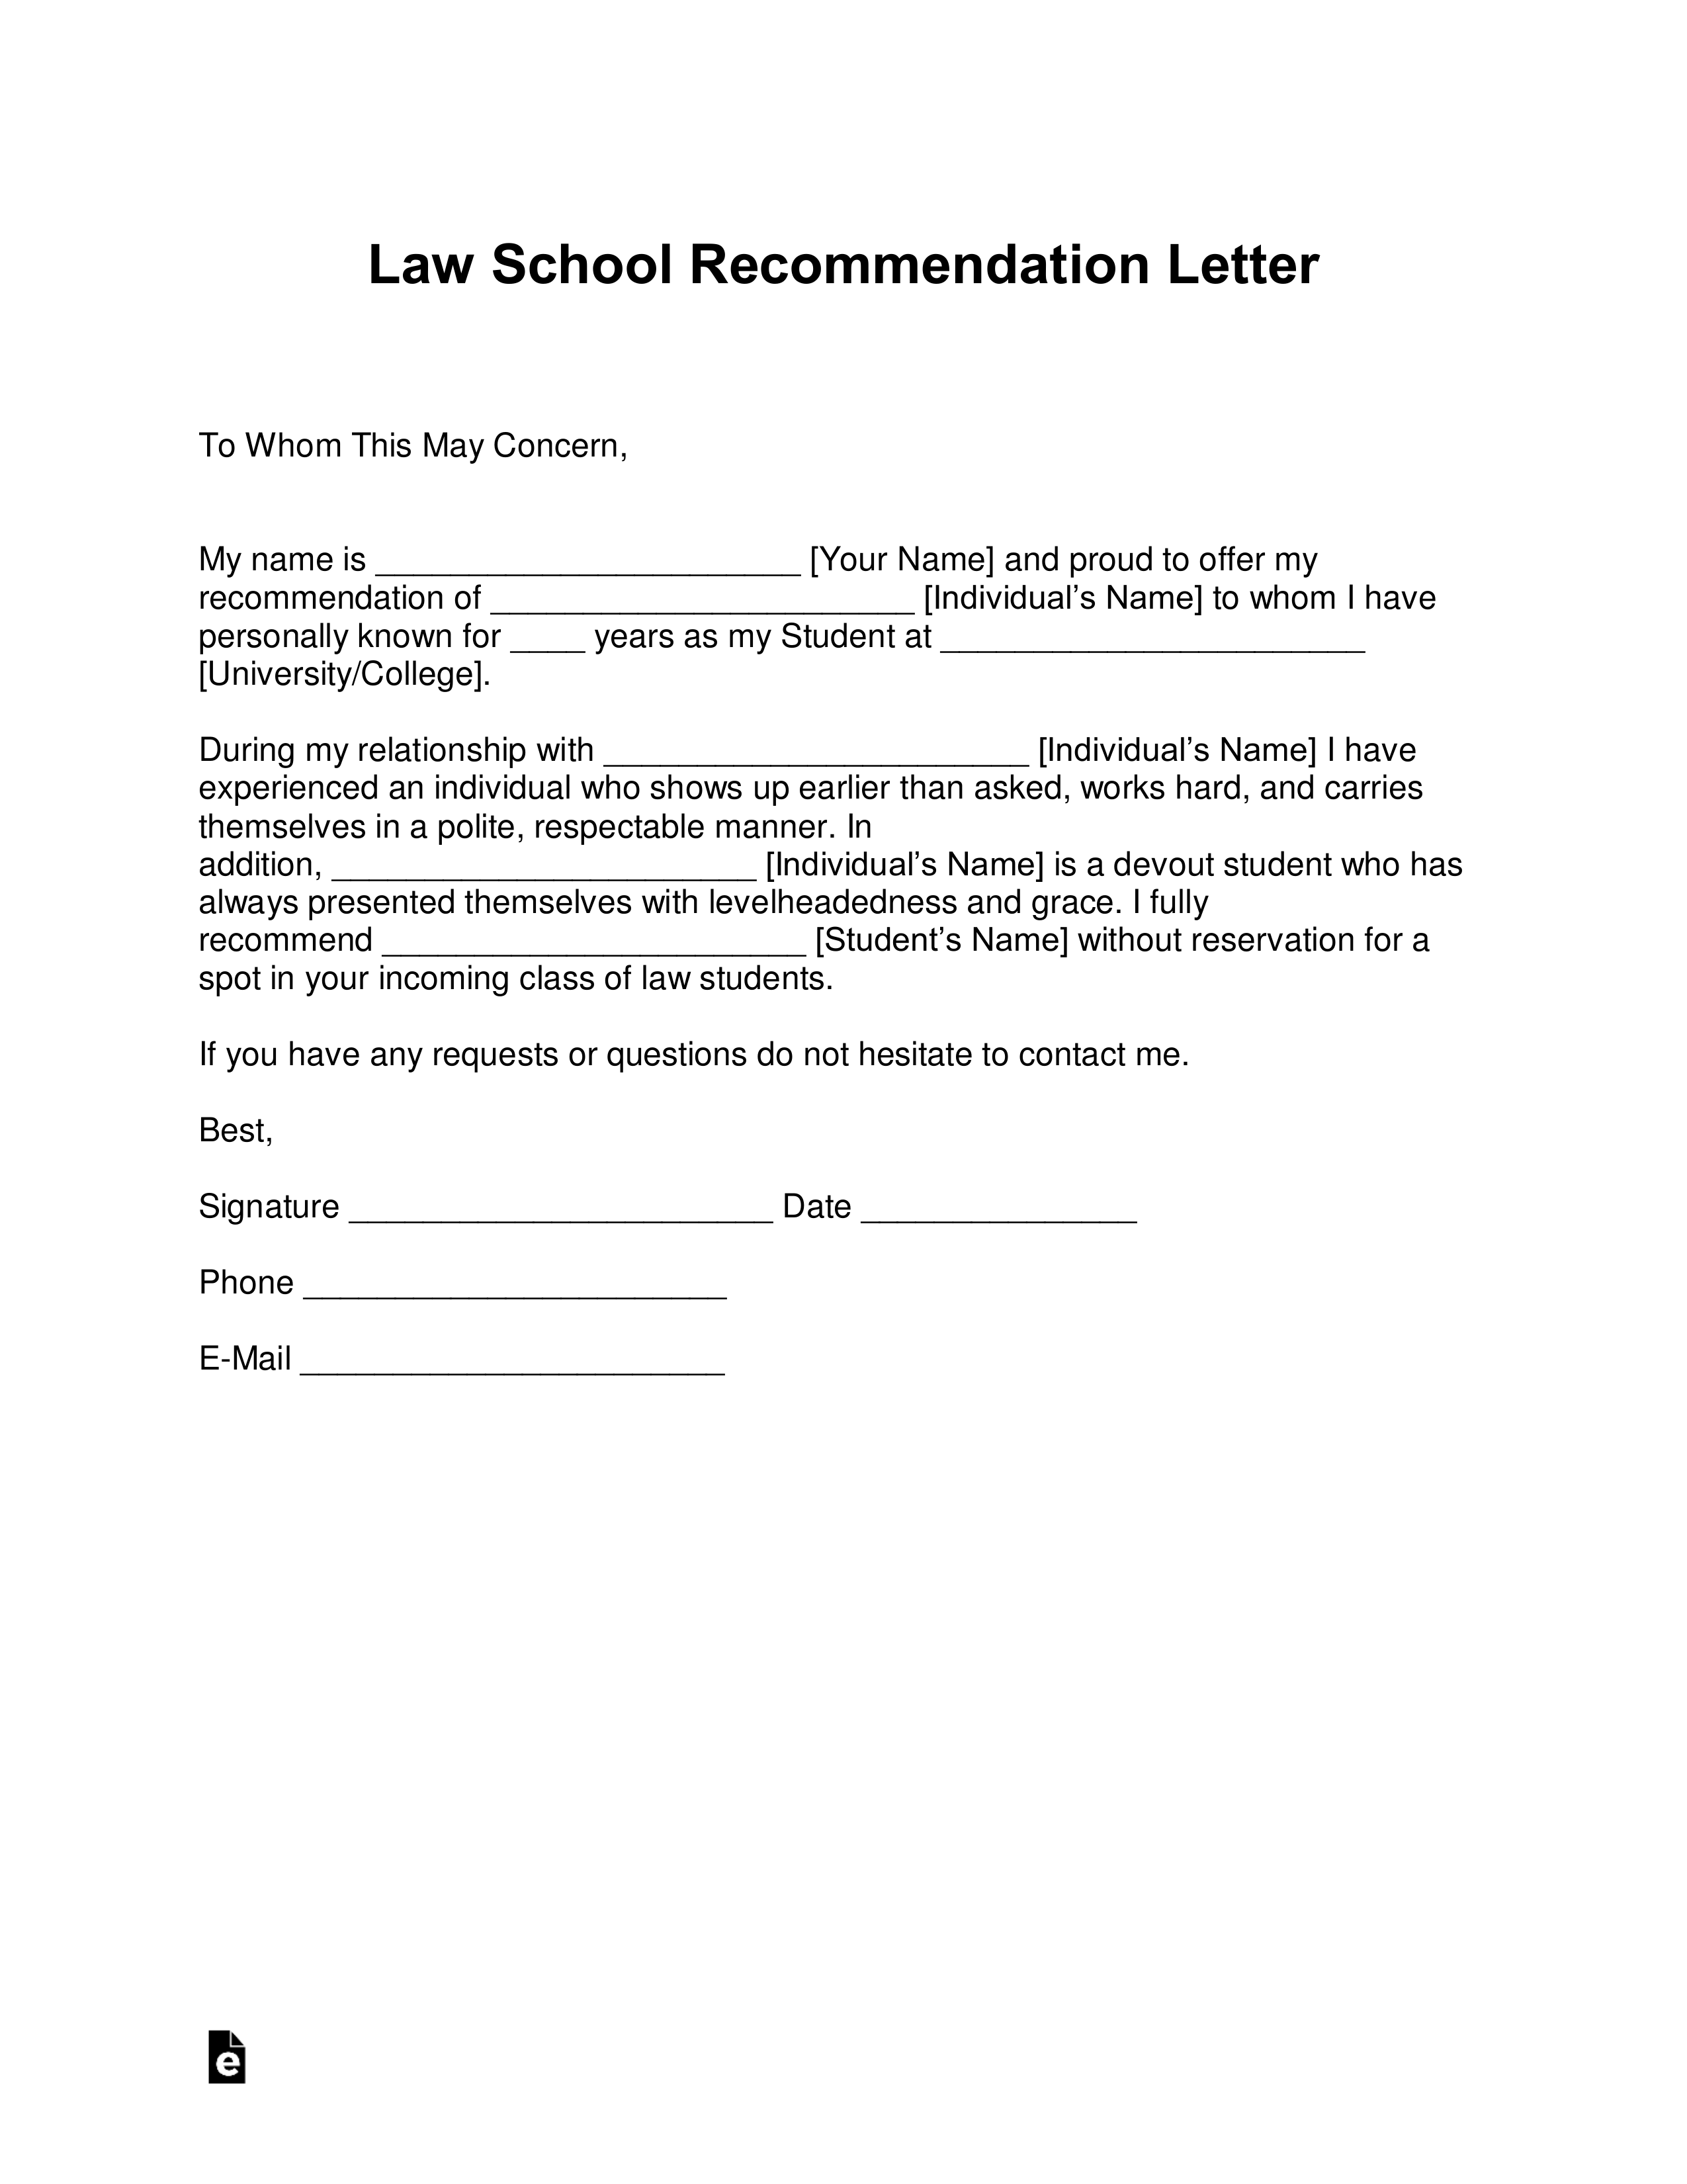 Letter Of Recommendation For A Student Template from eforms.com